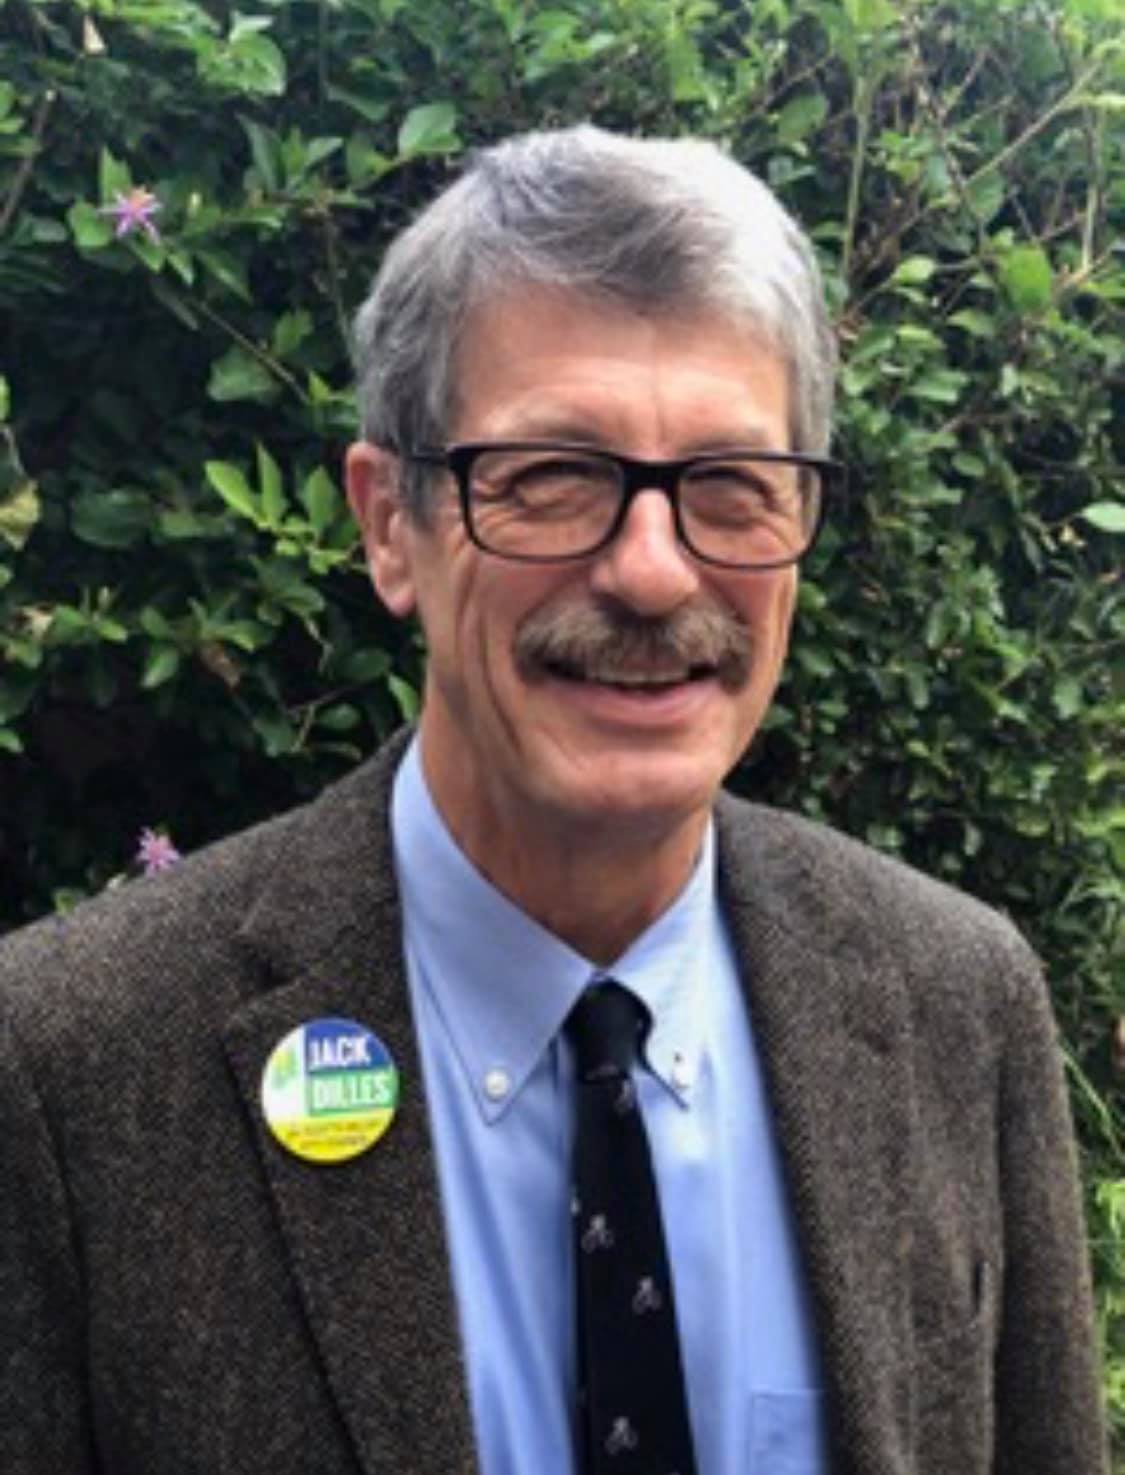 Meet Your Scotts Valley City Council Candidate, Jack Dilles